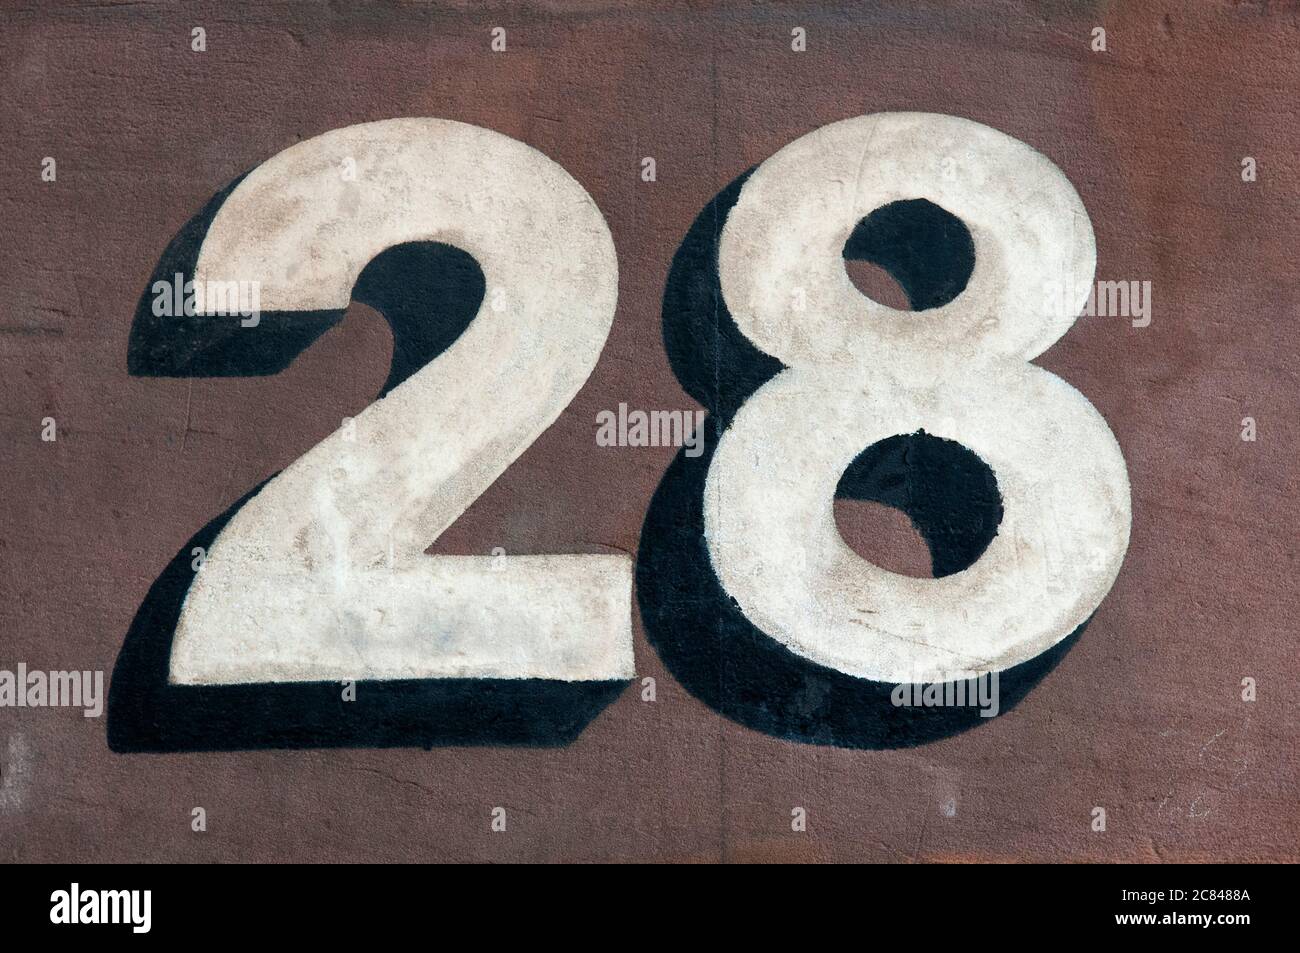 The Door Number 28 Hand Painted In White With A Shadow Effect On A Wall Stock Photo